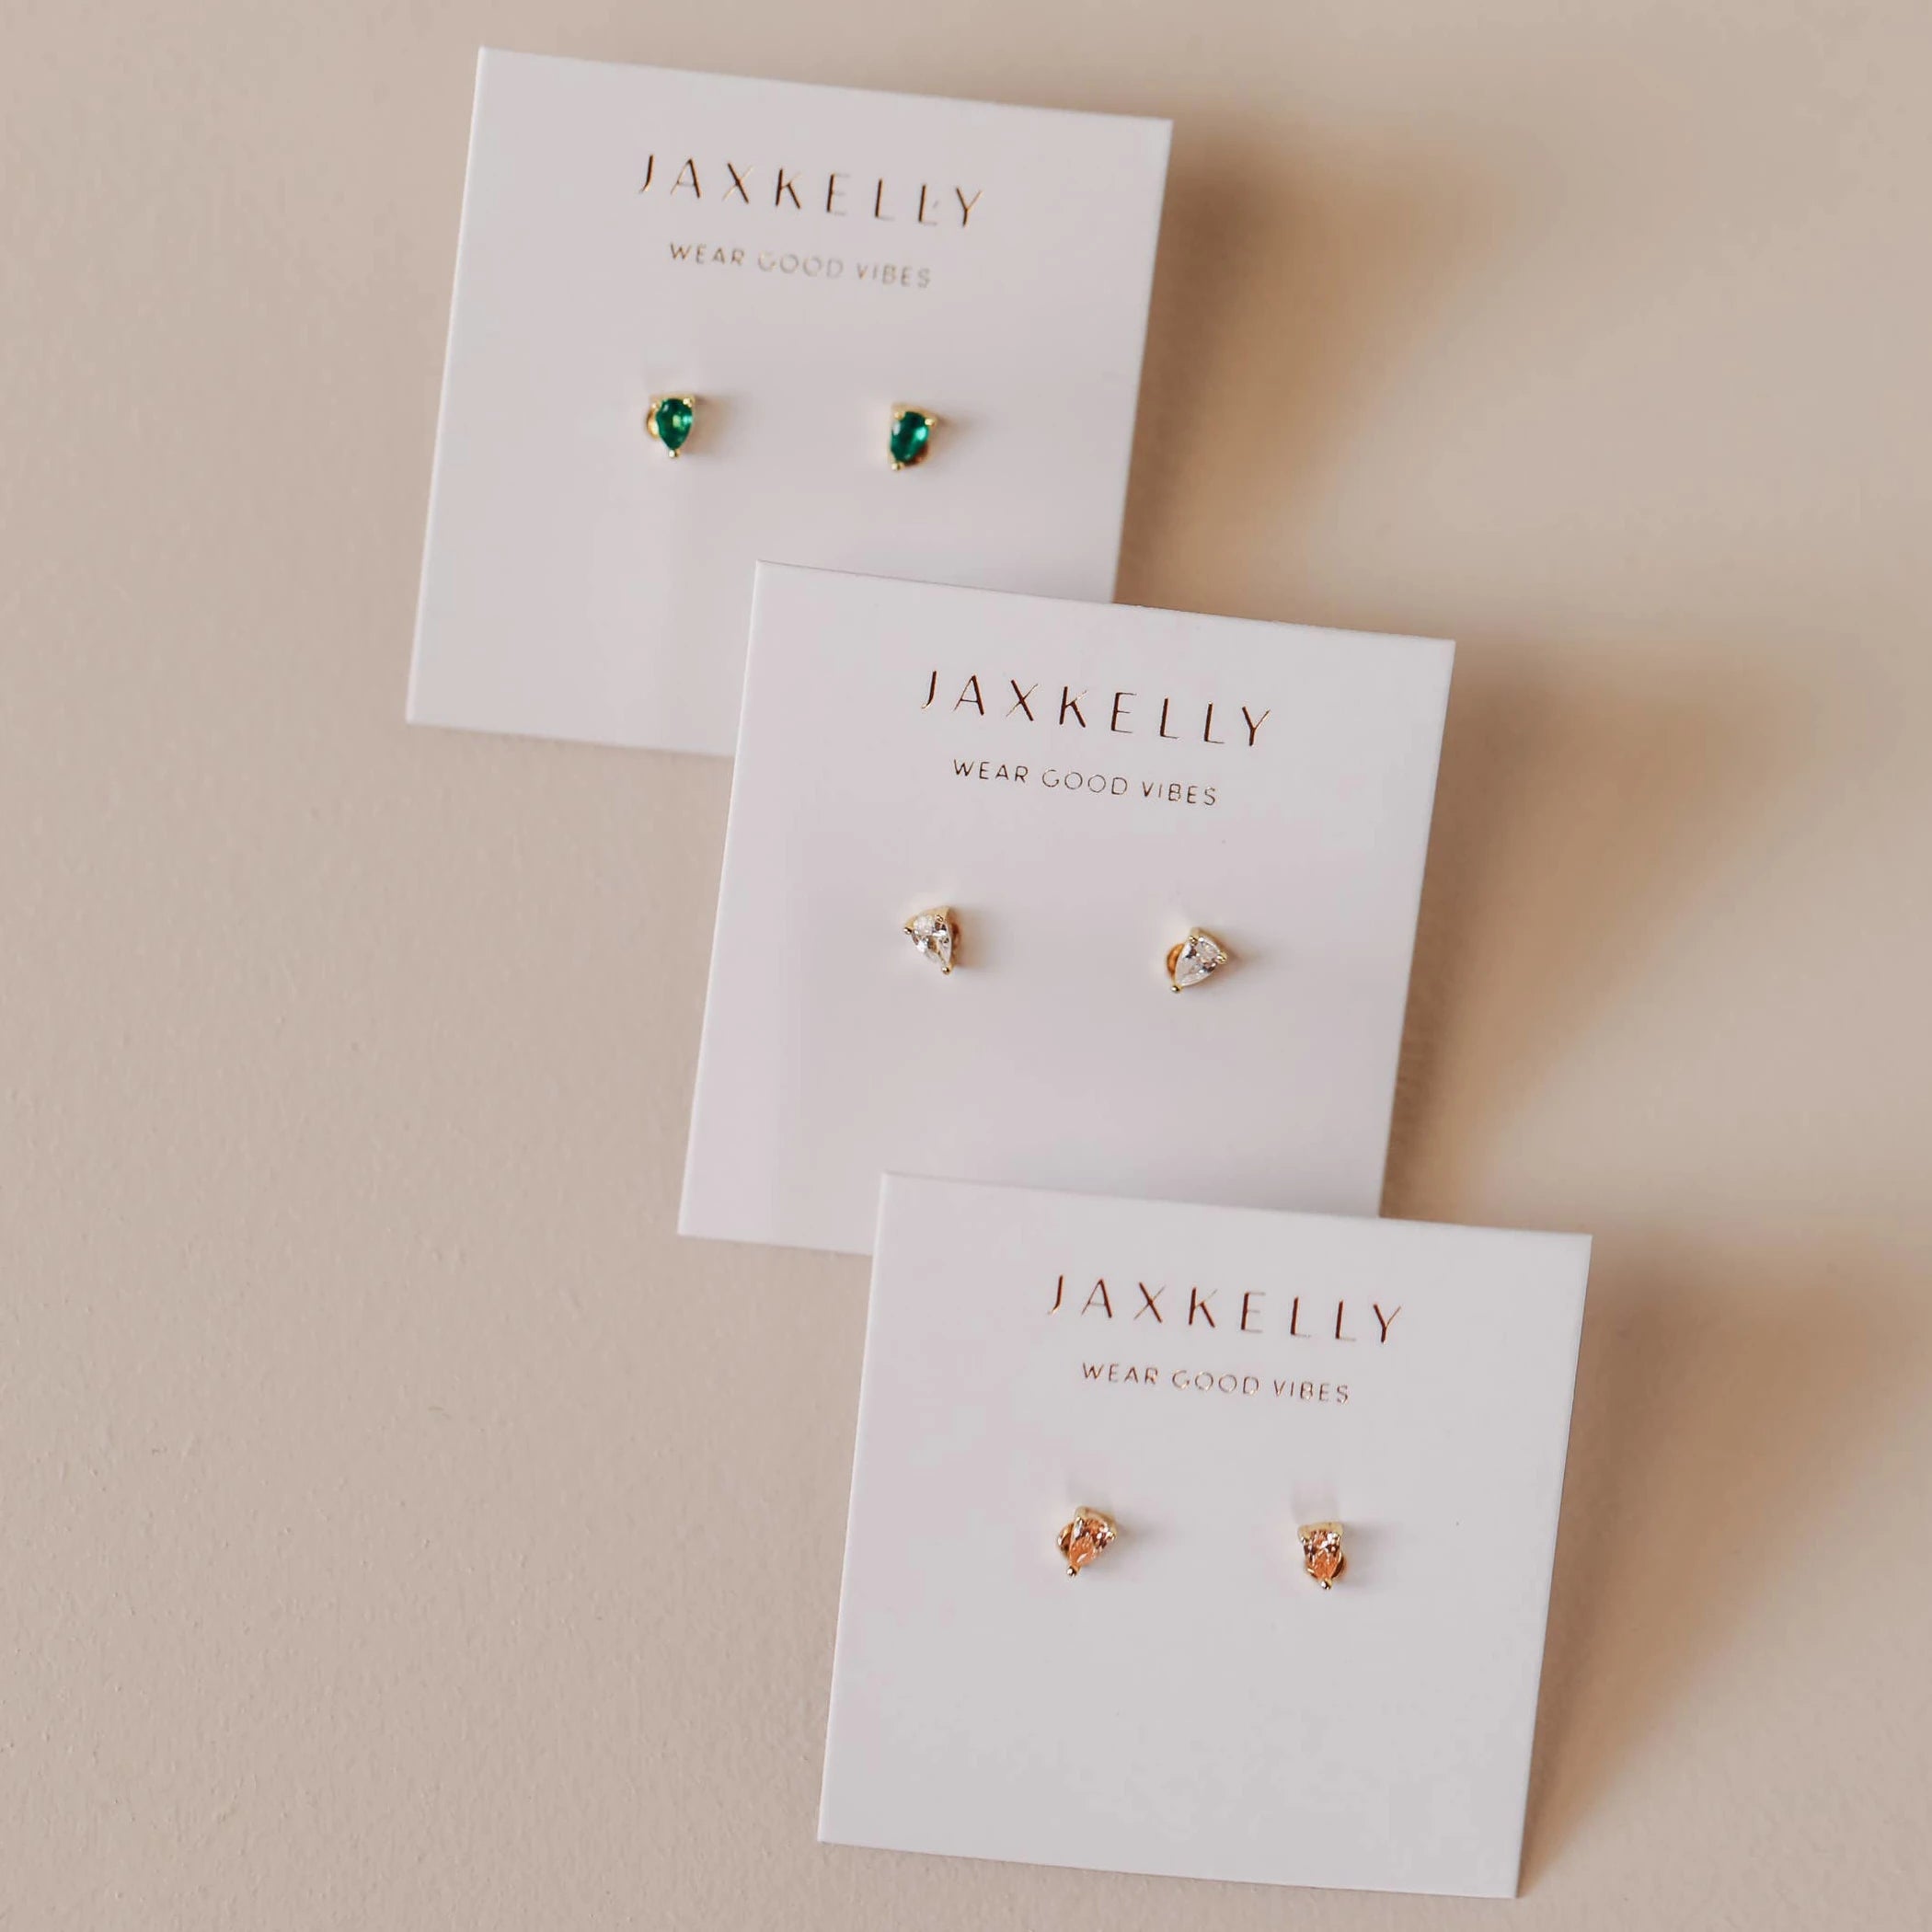 Three different colors of the champagne teardrop stud earrings.